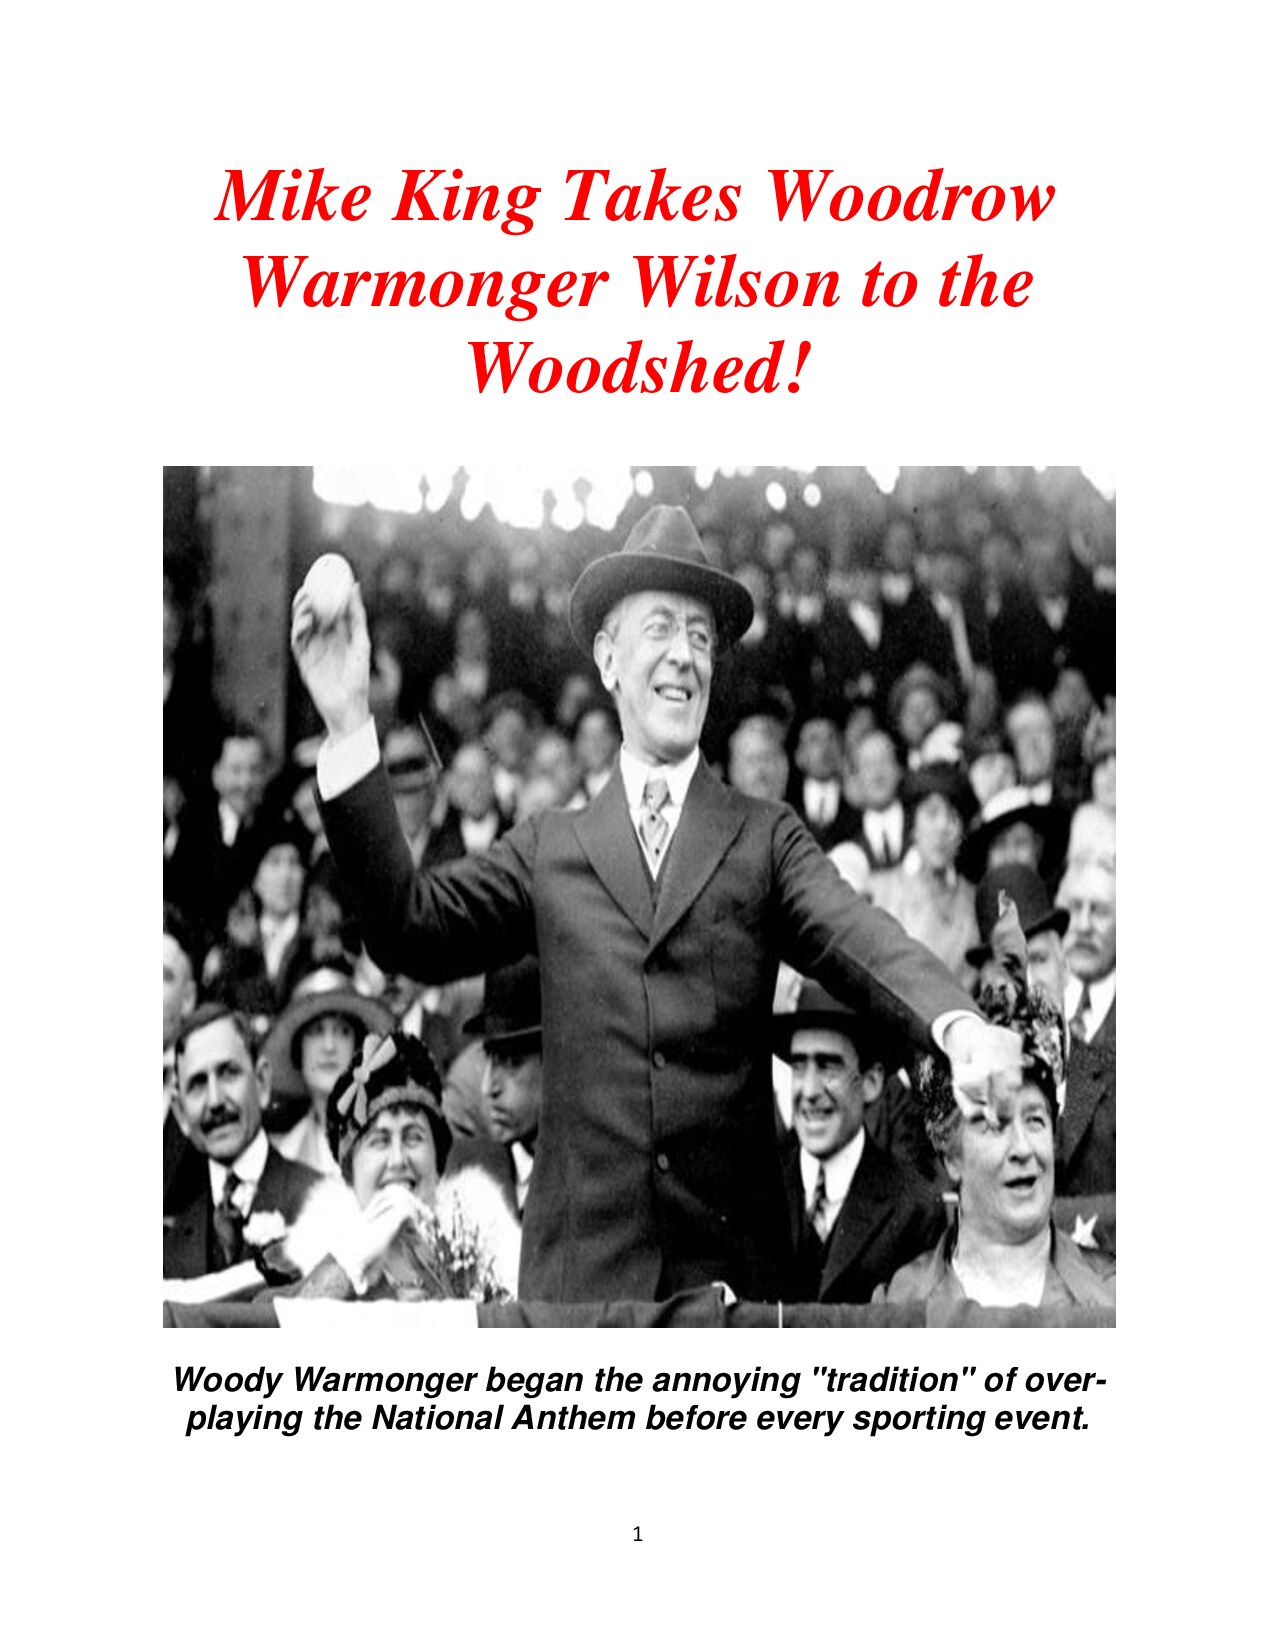 King, Mike S.; Woodrow Warmonger Wilson to the Woodshed